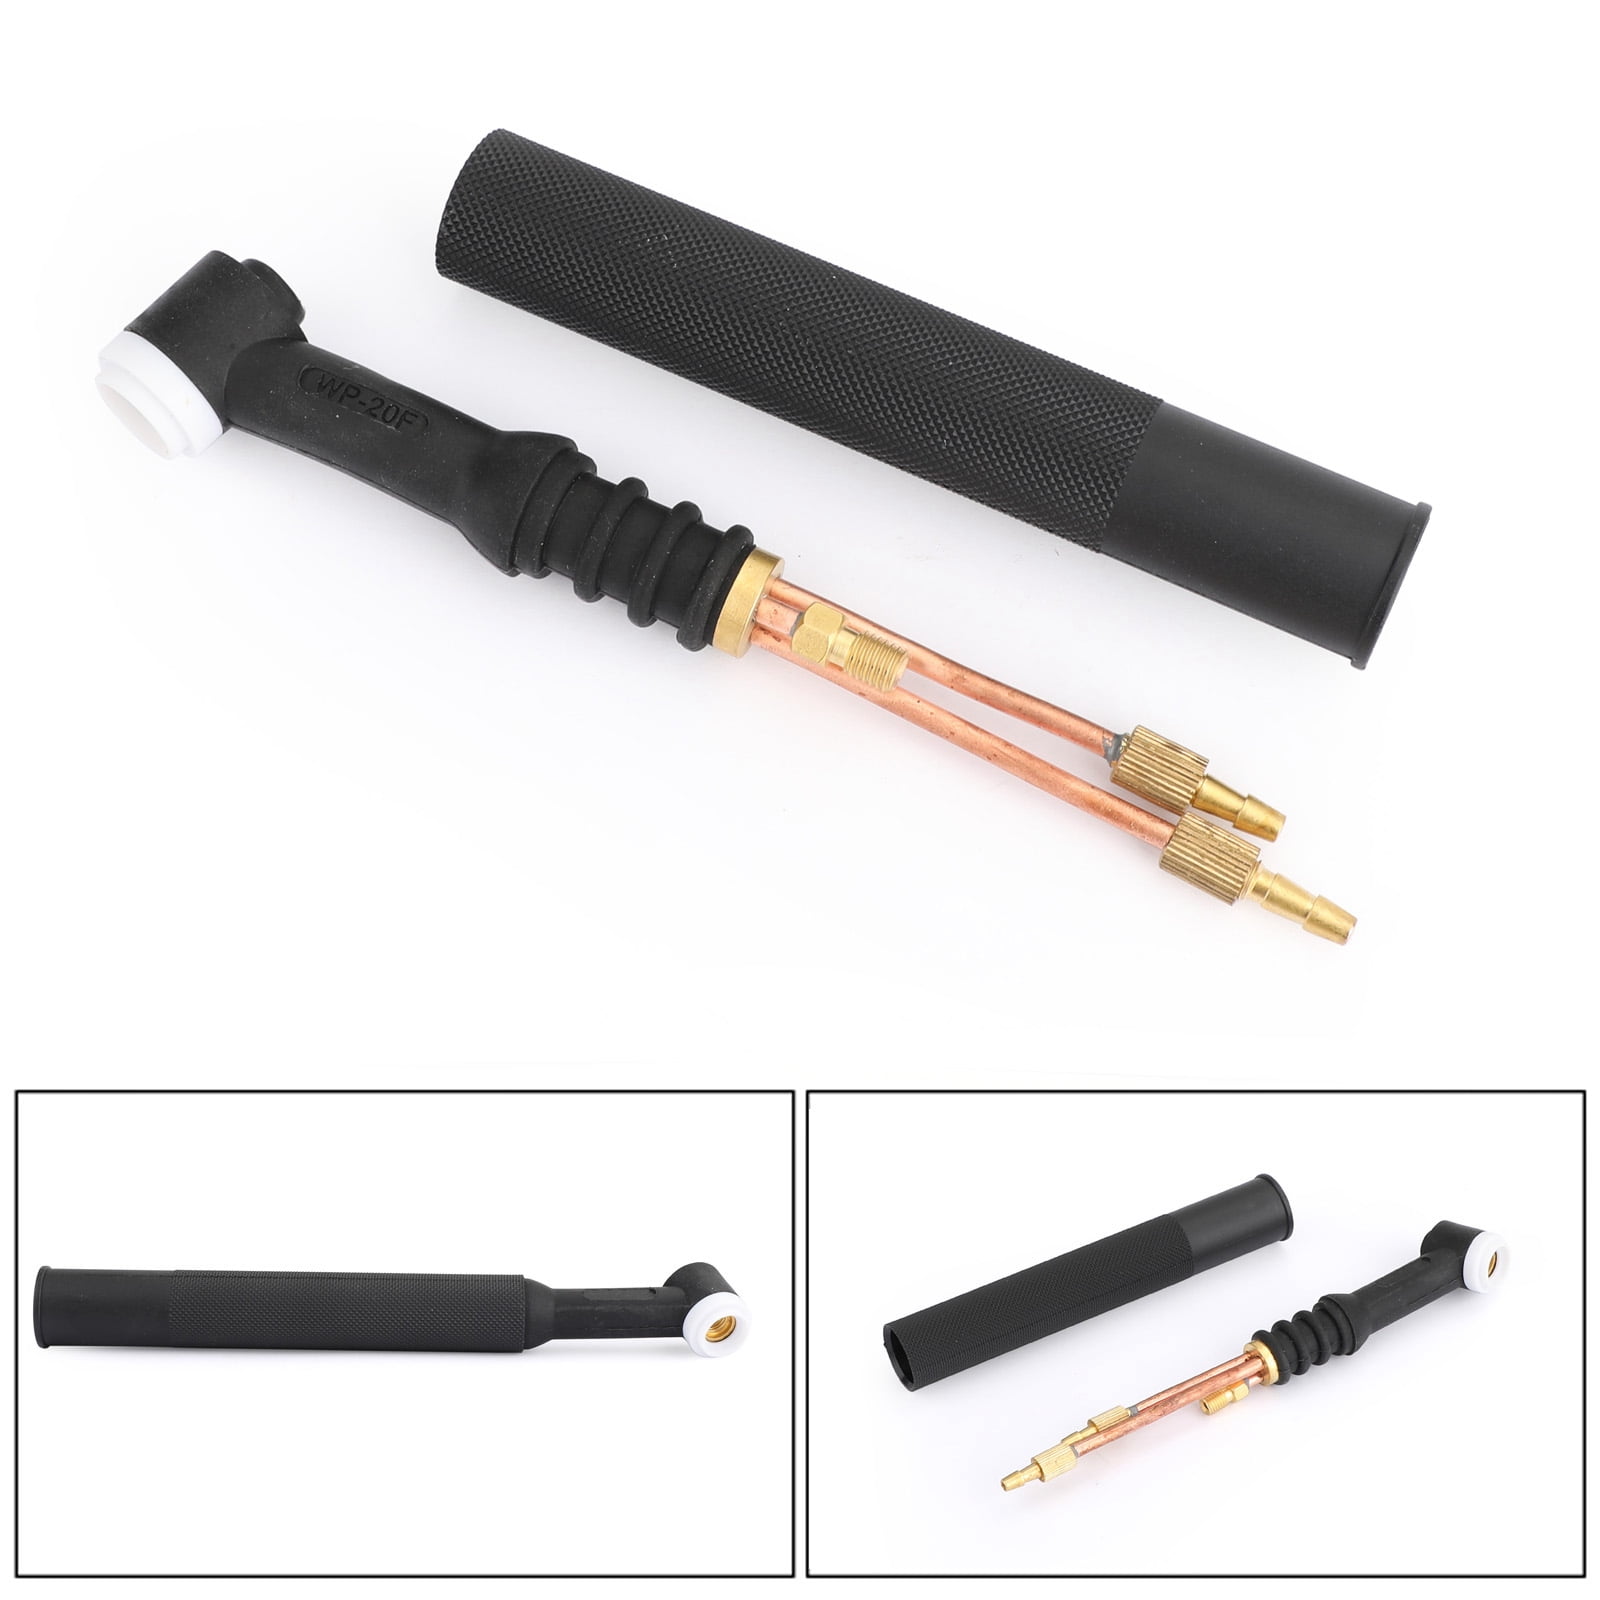 WP-20F Flexible TIG Welding Torch Head Body For Cooled Water 250A Series Machine 